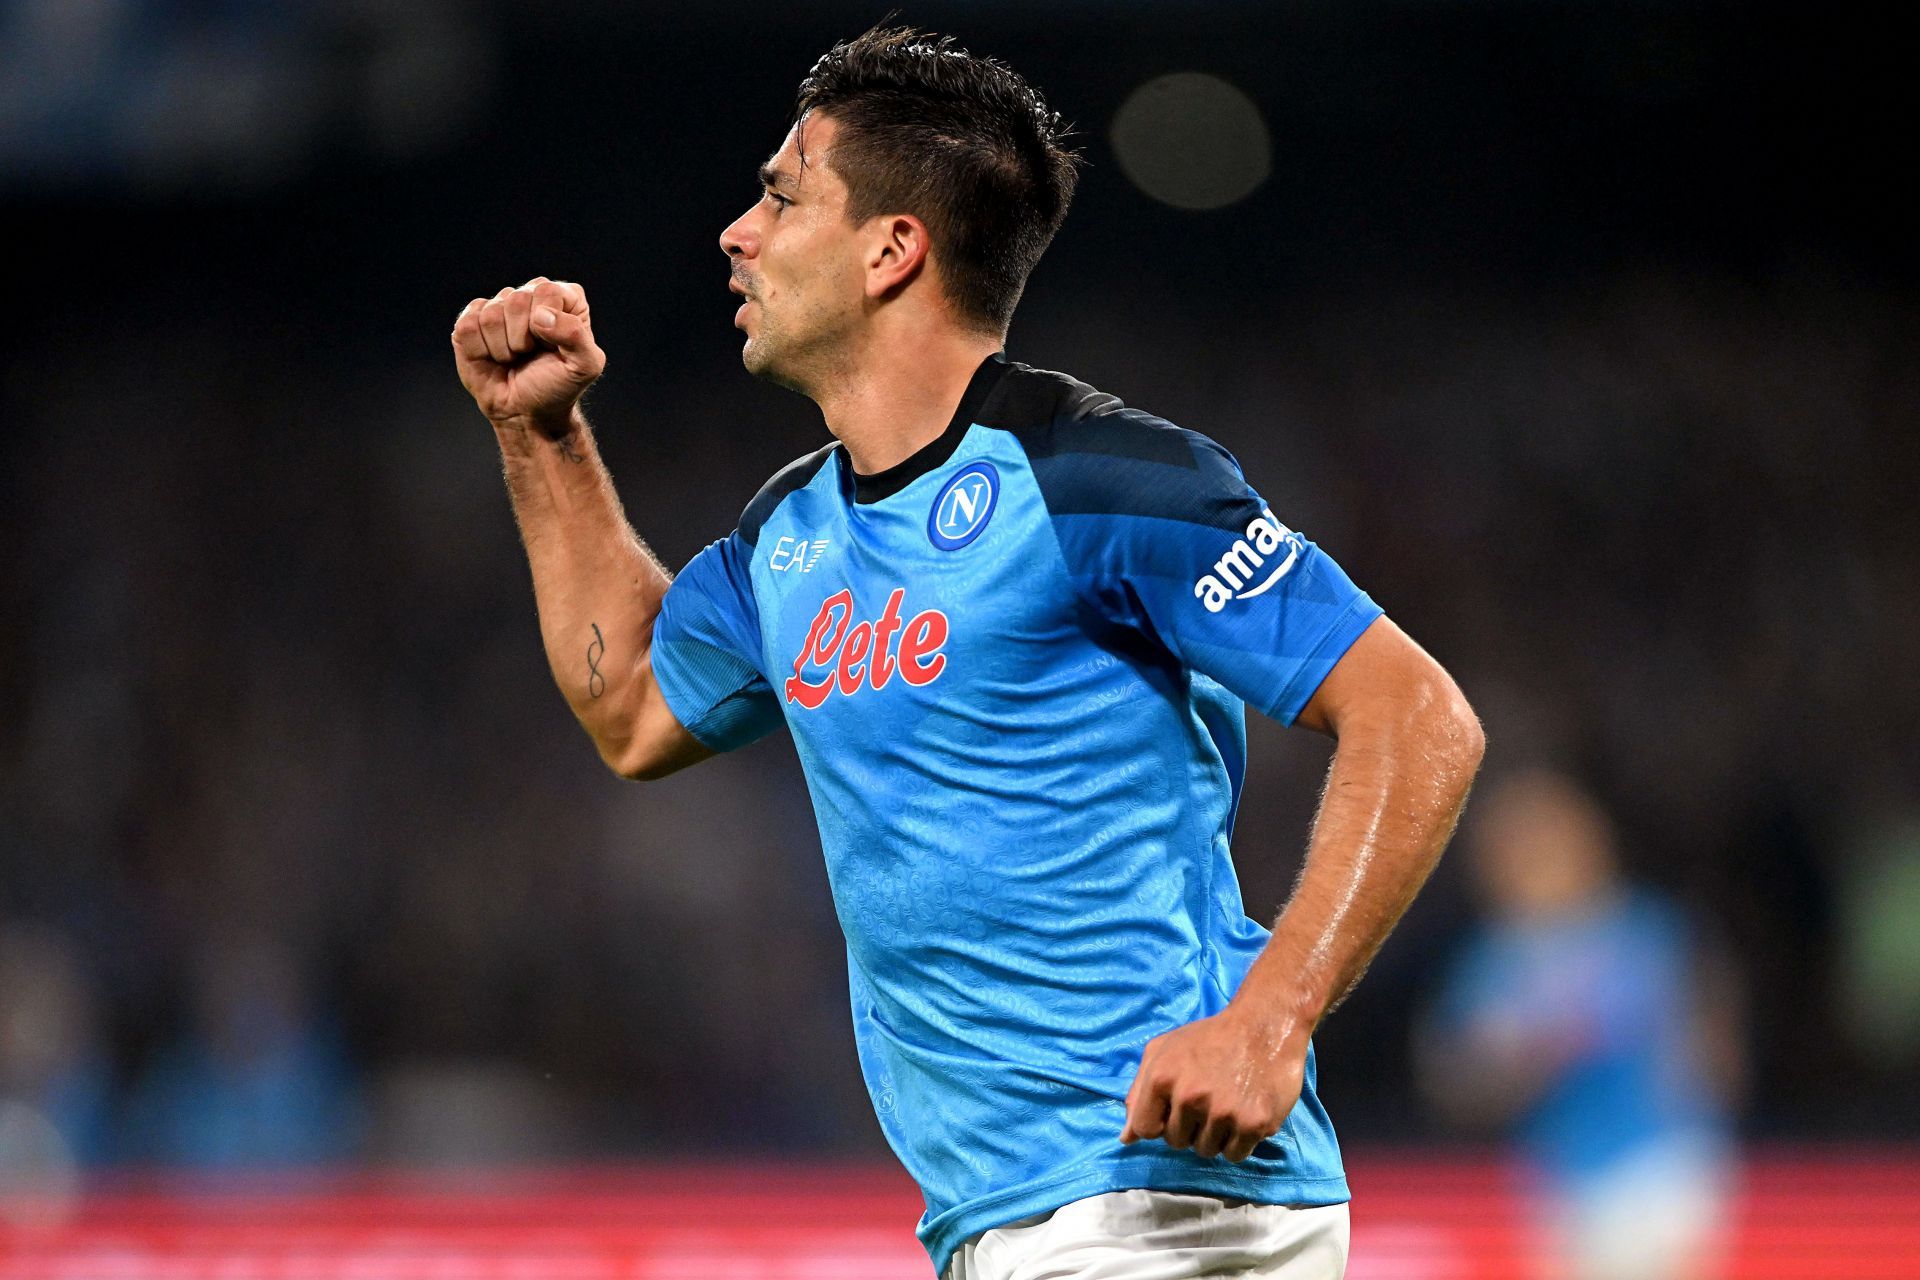 Napoli beat Rangers to remain perfect in Europe